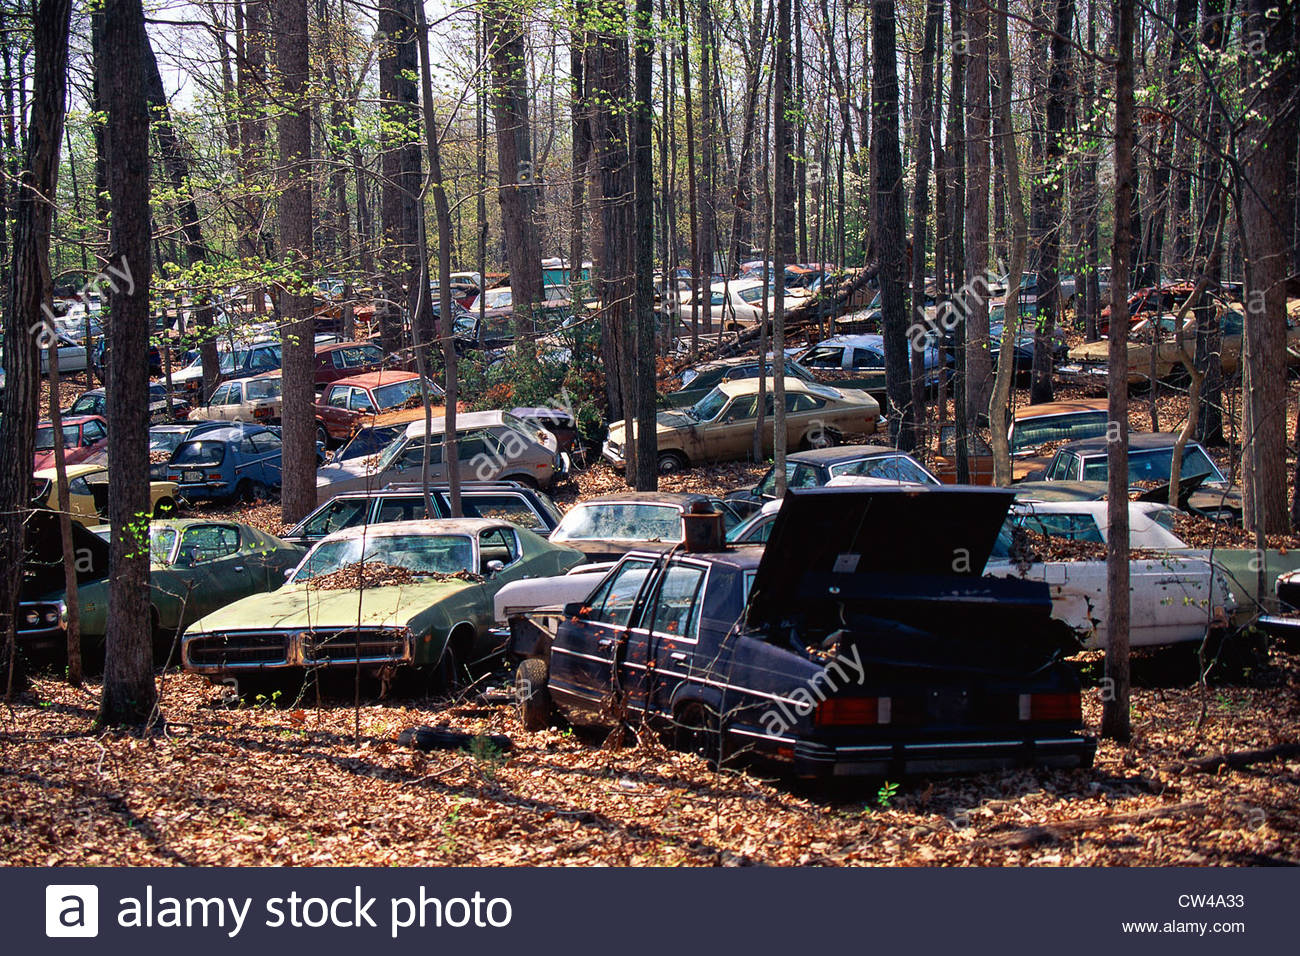 abandoned-cars-in-the-woods-CW4A33.jpg